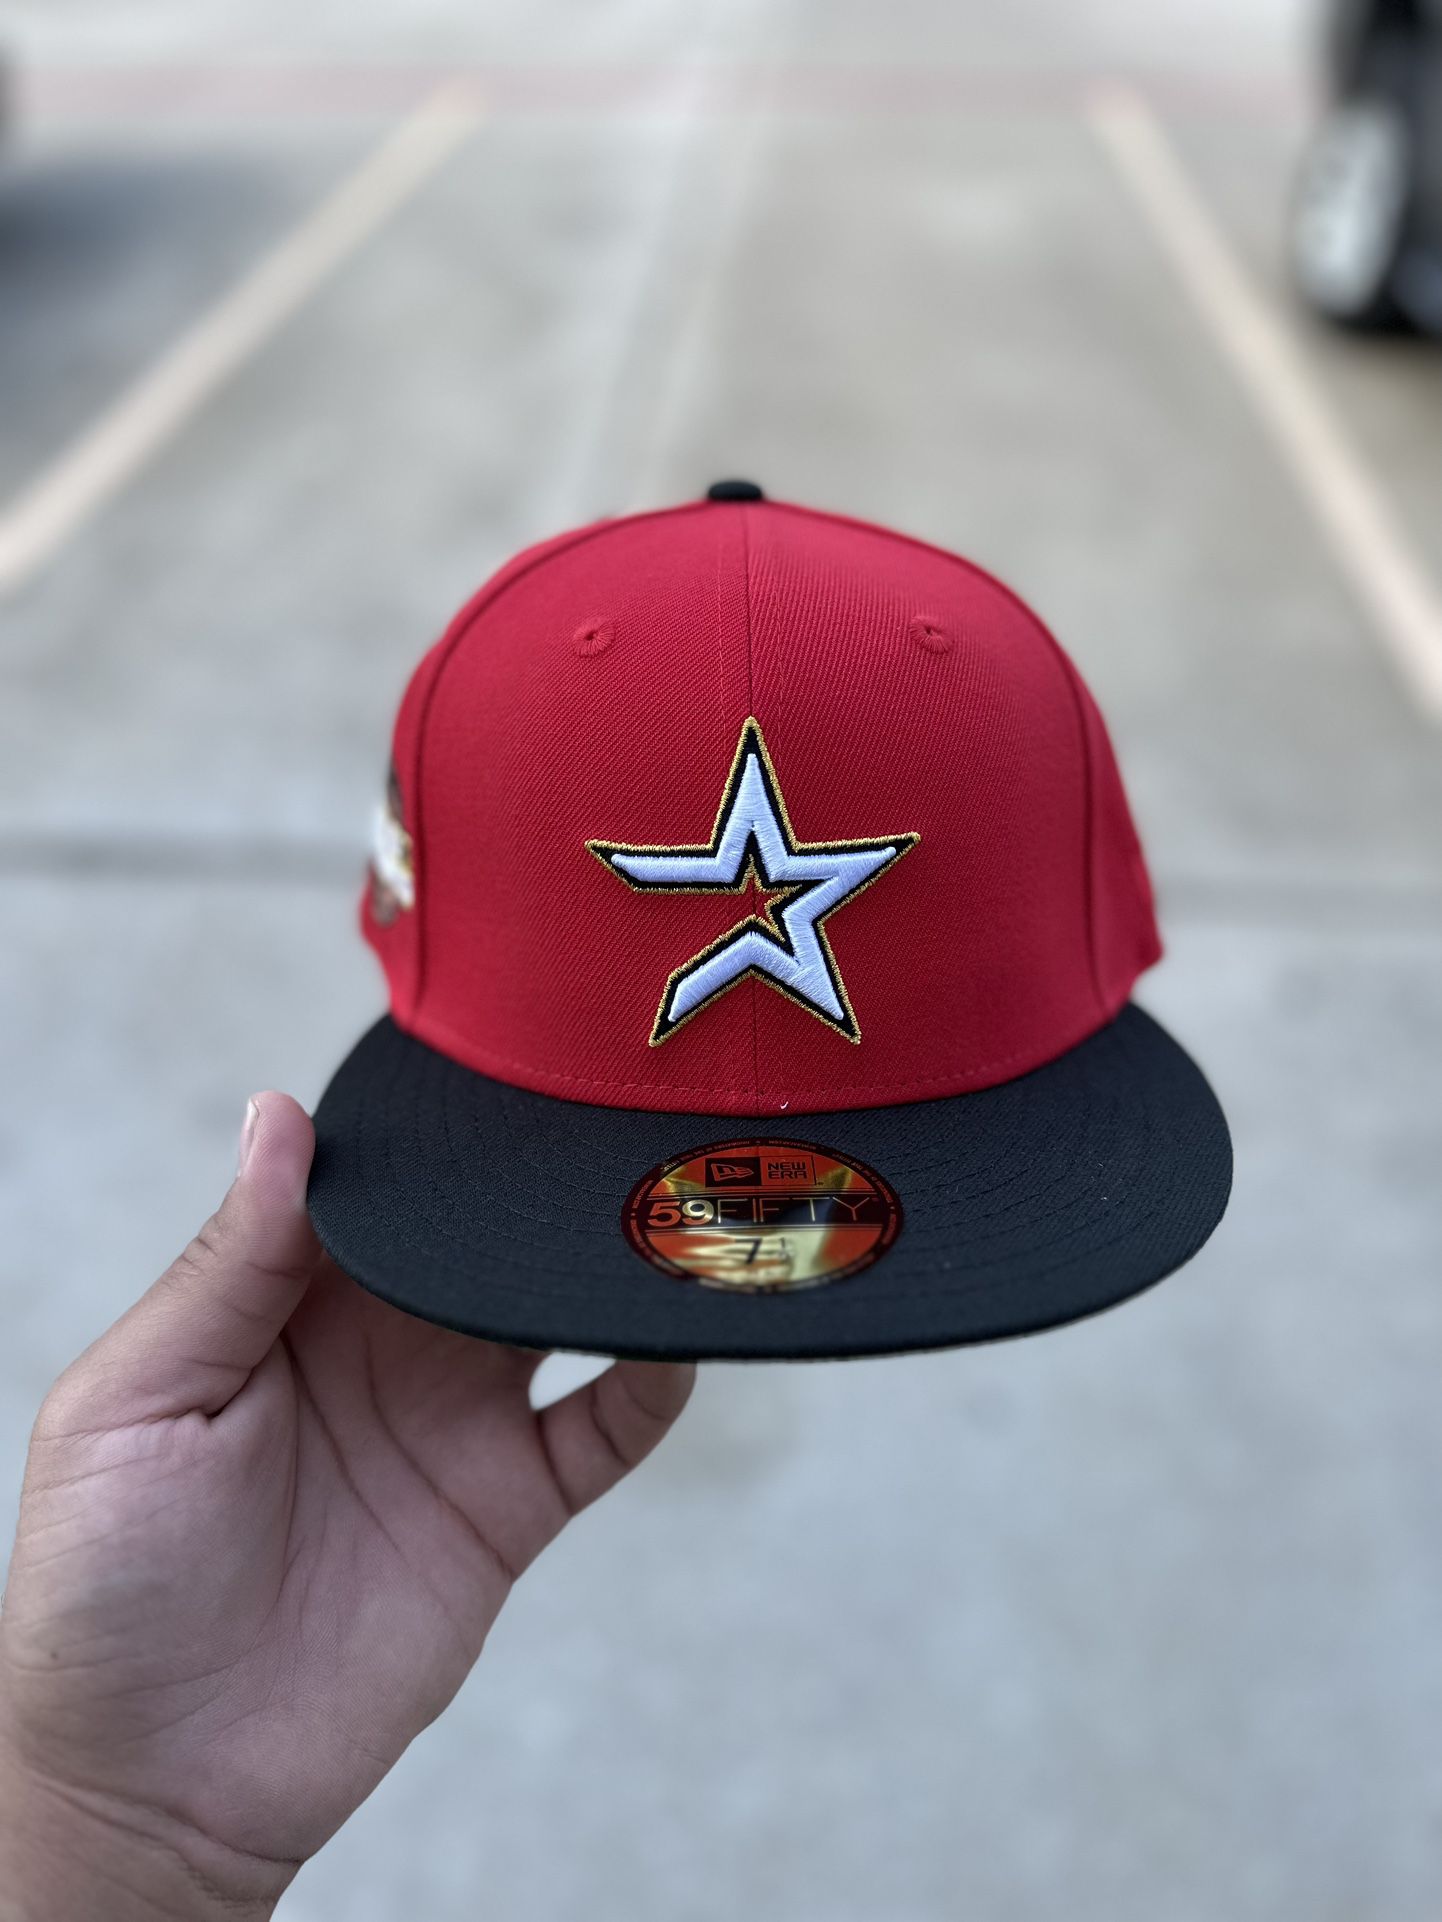 Houston Astros Fitted Hat Dreams Red Broken Star 7 1/2 for Sale in